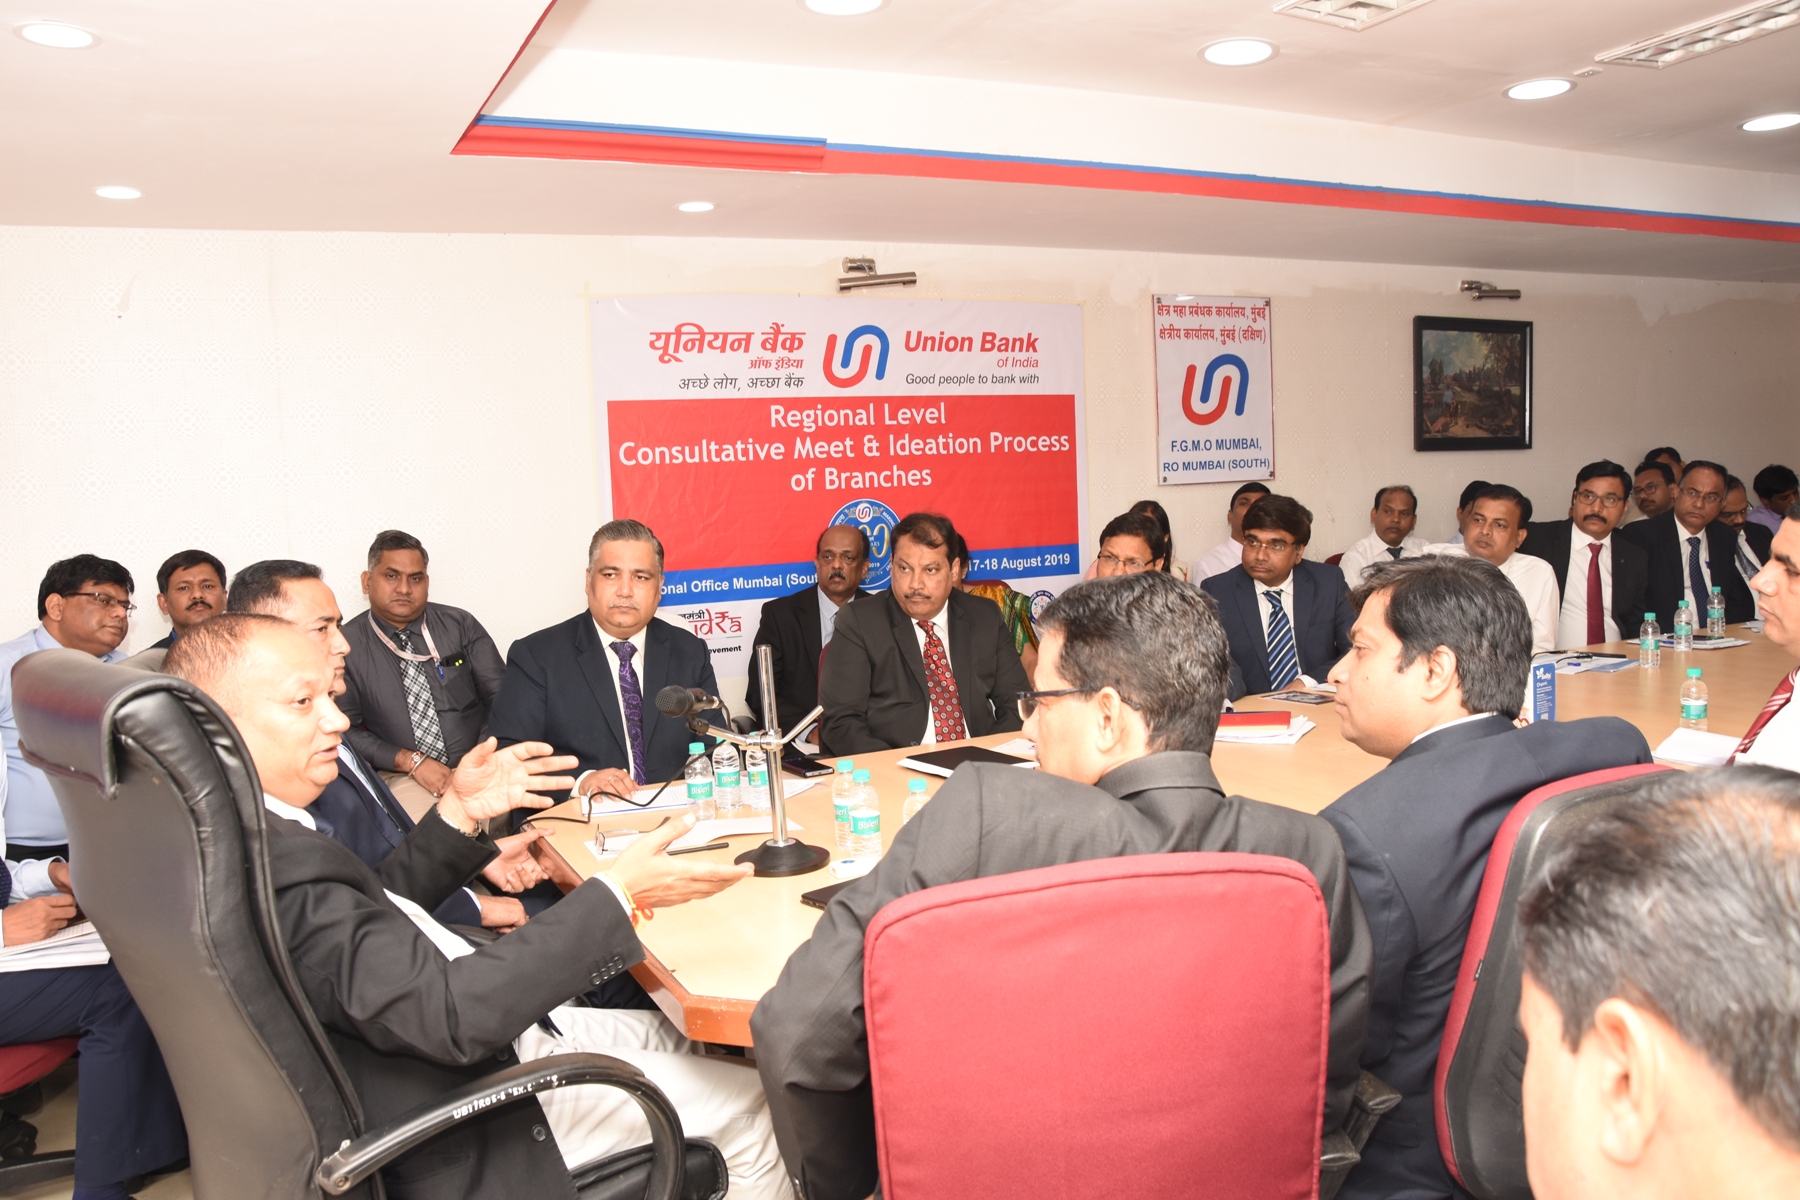 Mr. Gopal Singh Gusain, ED, Union Bank of India, (extreme left) addresses the Bank officials during the Consultative Meet & Ideation Process of Branches of Union Bank of India in Mumbai on 17th August 2019. Mumbai South Regional Office of Union Bank of India organised meeting of all Branch Heads on 17th & 18th August 2019 wherein collective consultative and ideation process was undertaken to align Banking with national priorities.